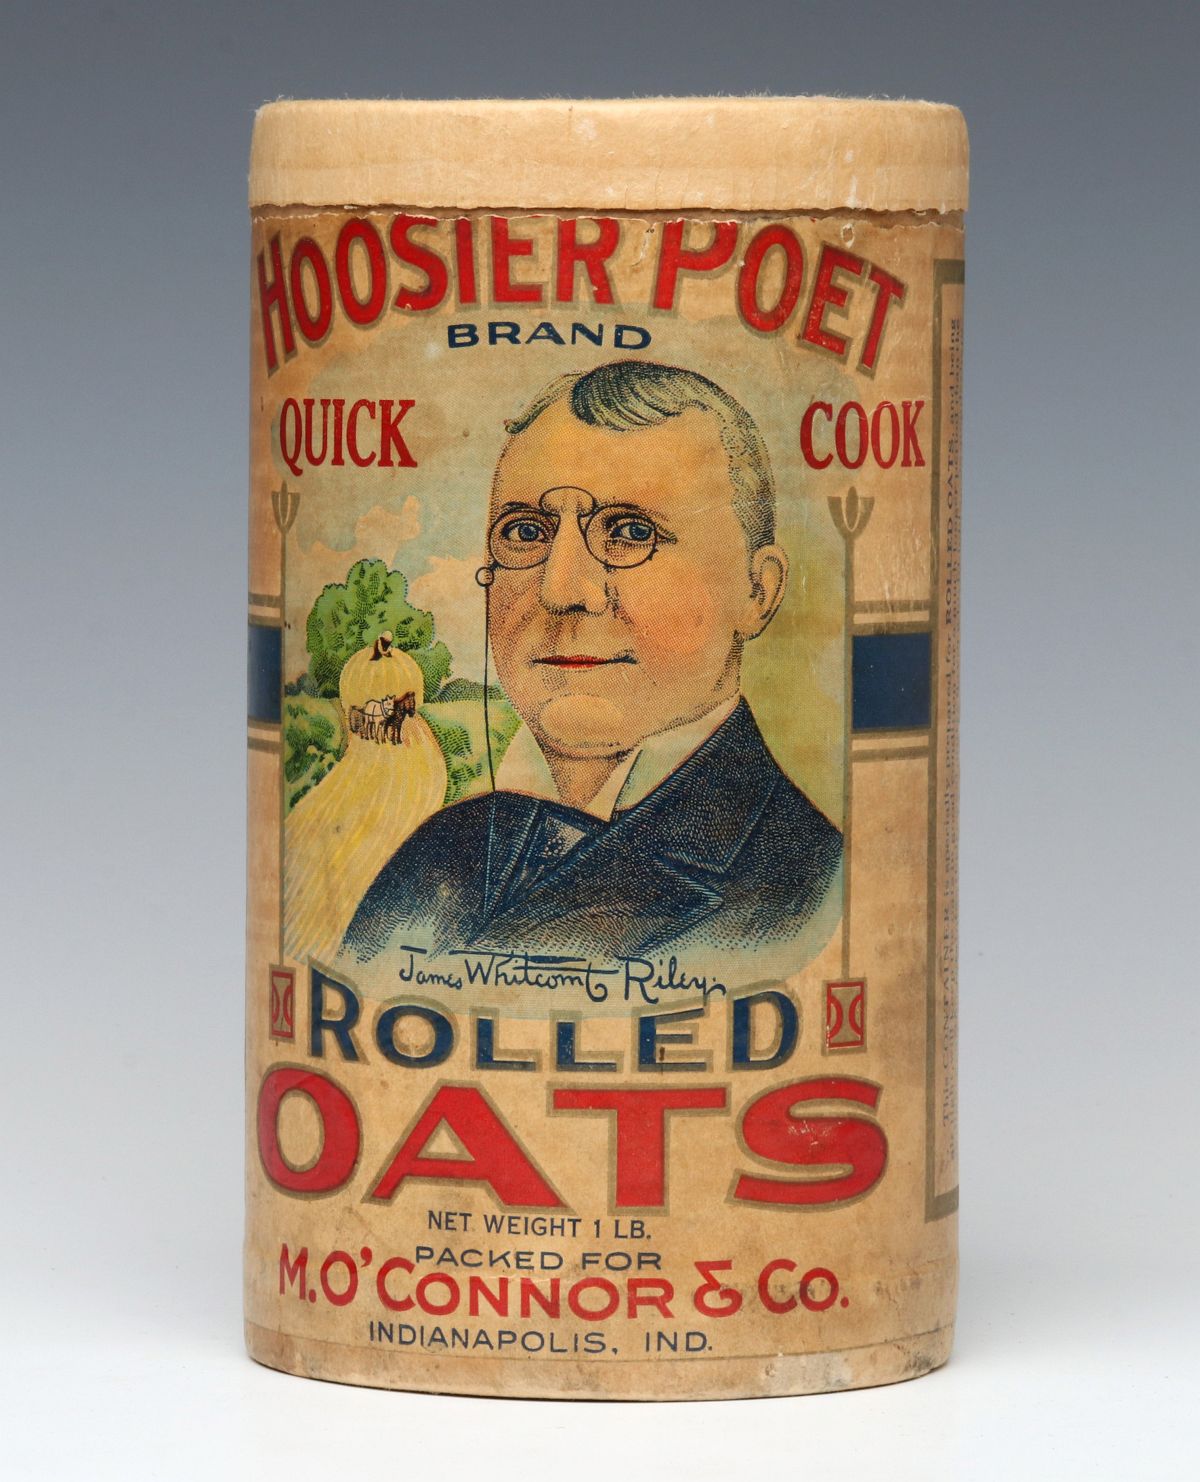 A 'HOOSIER POET' BRAND ROLLED OATS CONTAINER